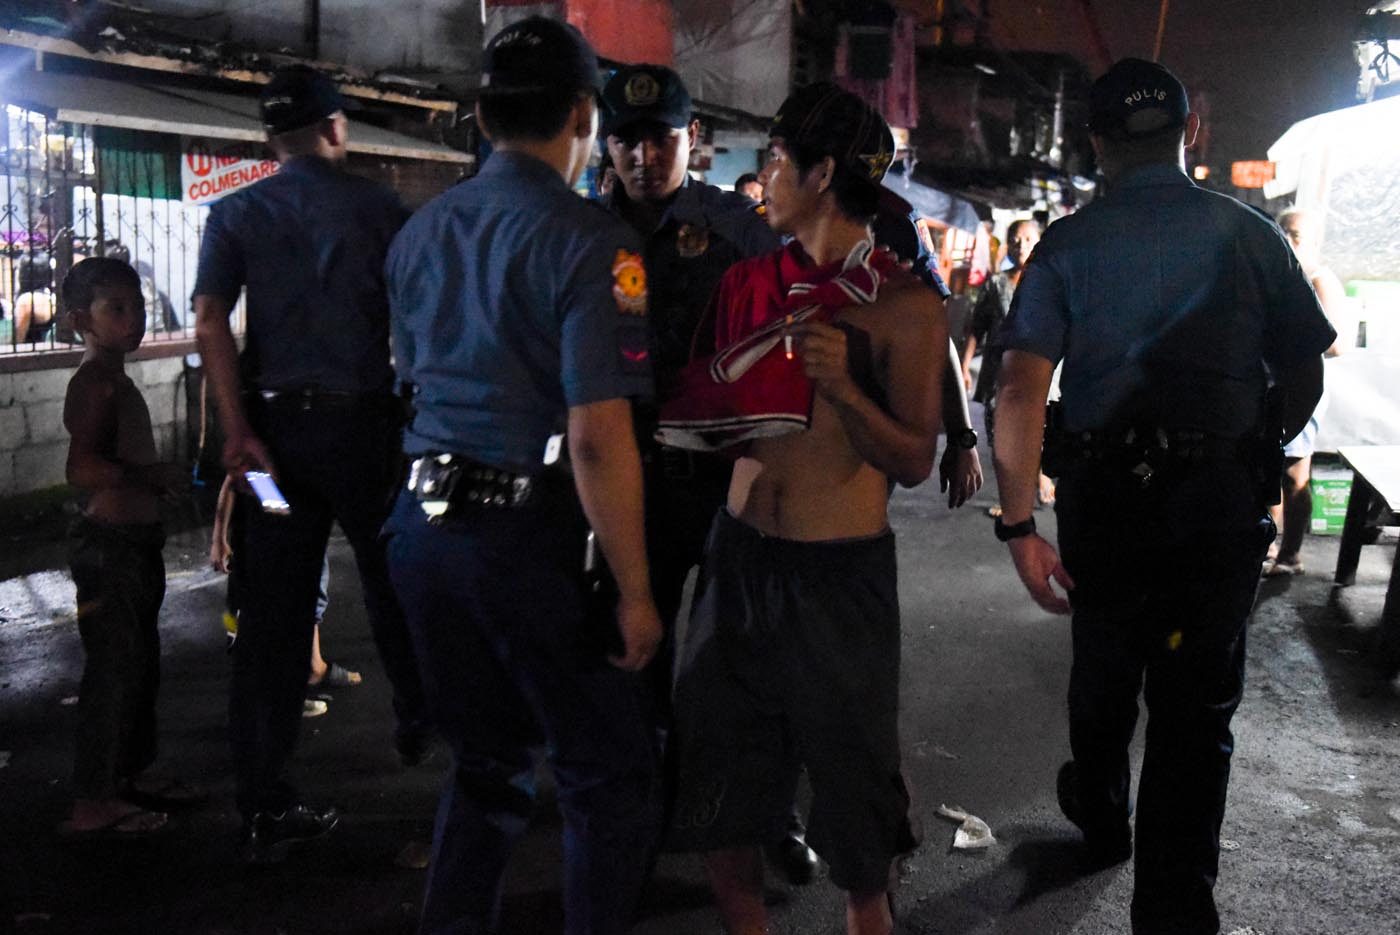 NOT ALL ARE DRUG SUSPECTS. Bystanders and shirtless men are 'invited' by the police for 'validation.' 